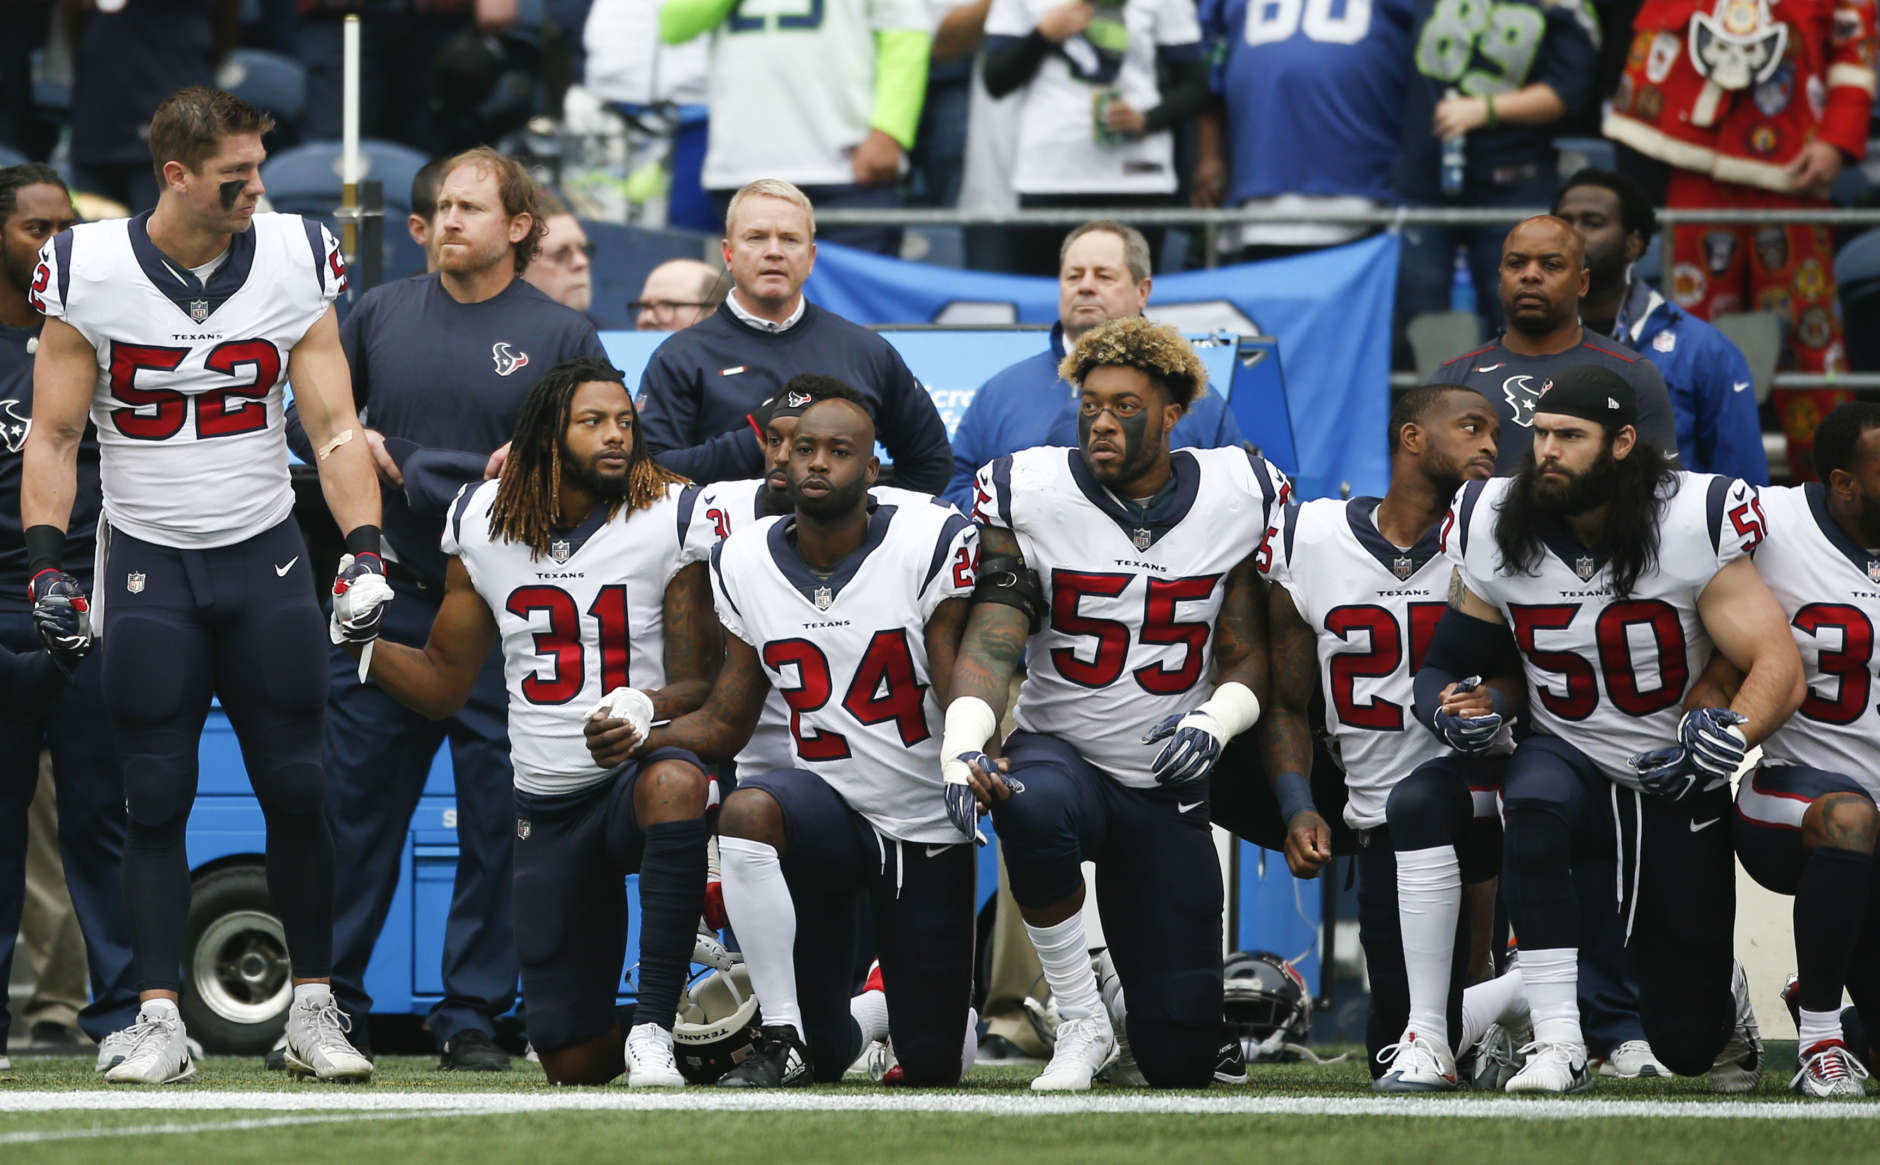 SEATTLE, WA - OCTOBER 29:  Members of the Houston Texans stand and kneel before the game against the Seattle Seahawks at CenturyLink Field on October 29, 2017 in Seattle, Washington. During a meeting of NFL owners earlier in October, Houston Texans owner Bob McNair said "we can't have the inmates running the prison", referring to player demonstrations during the national anthem. (Photo by Otto Greule Jr/Getty Images)